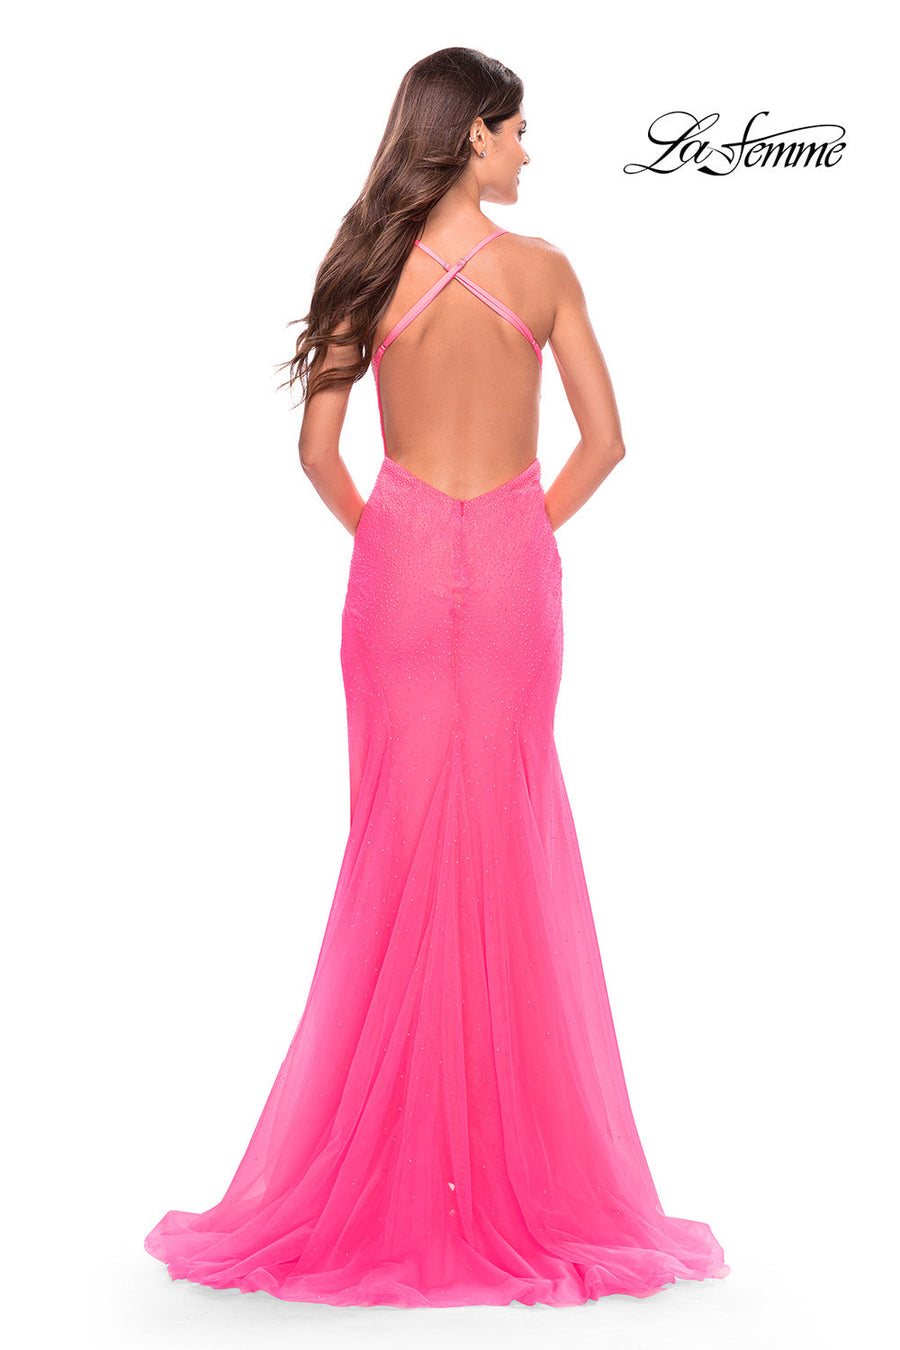 La Femme 31419 prom dress images.  La Femme 31419 is available in these colors: Hot Coral, Light Periwinkle, Neon Pink.